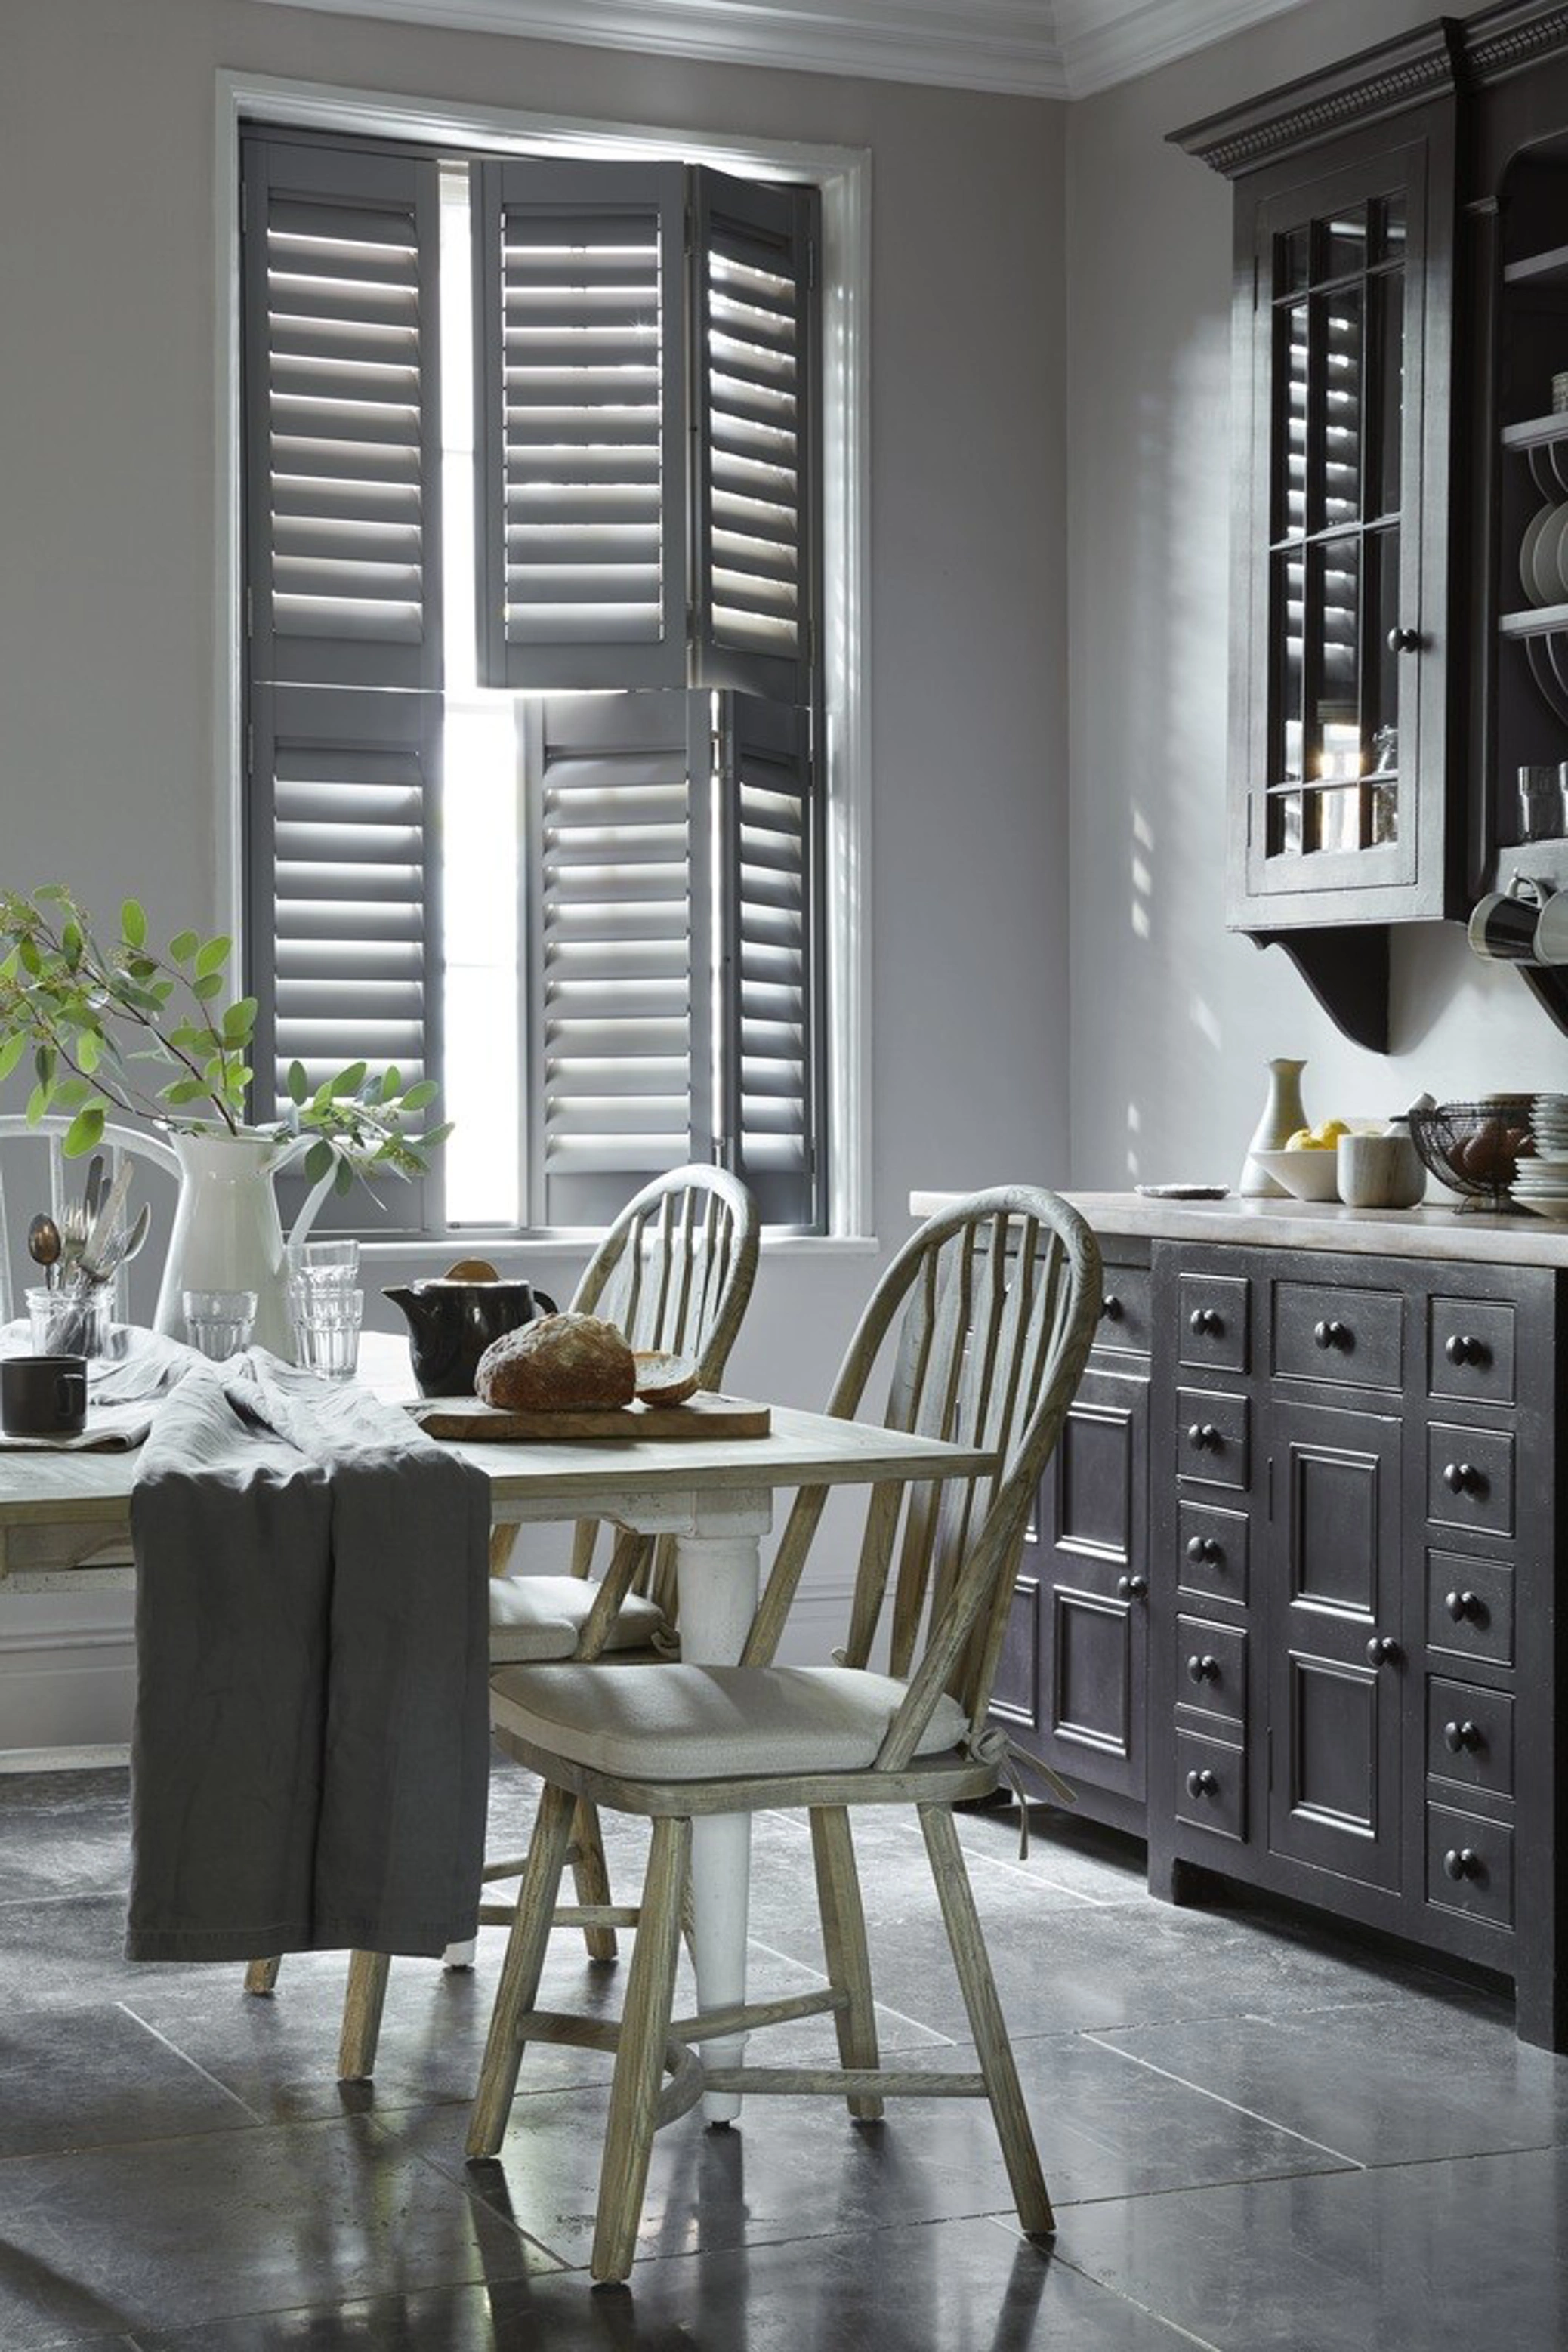 Signal Grey tier on tier wooden shutters in traditional kitchen